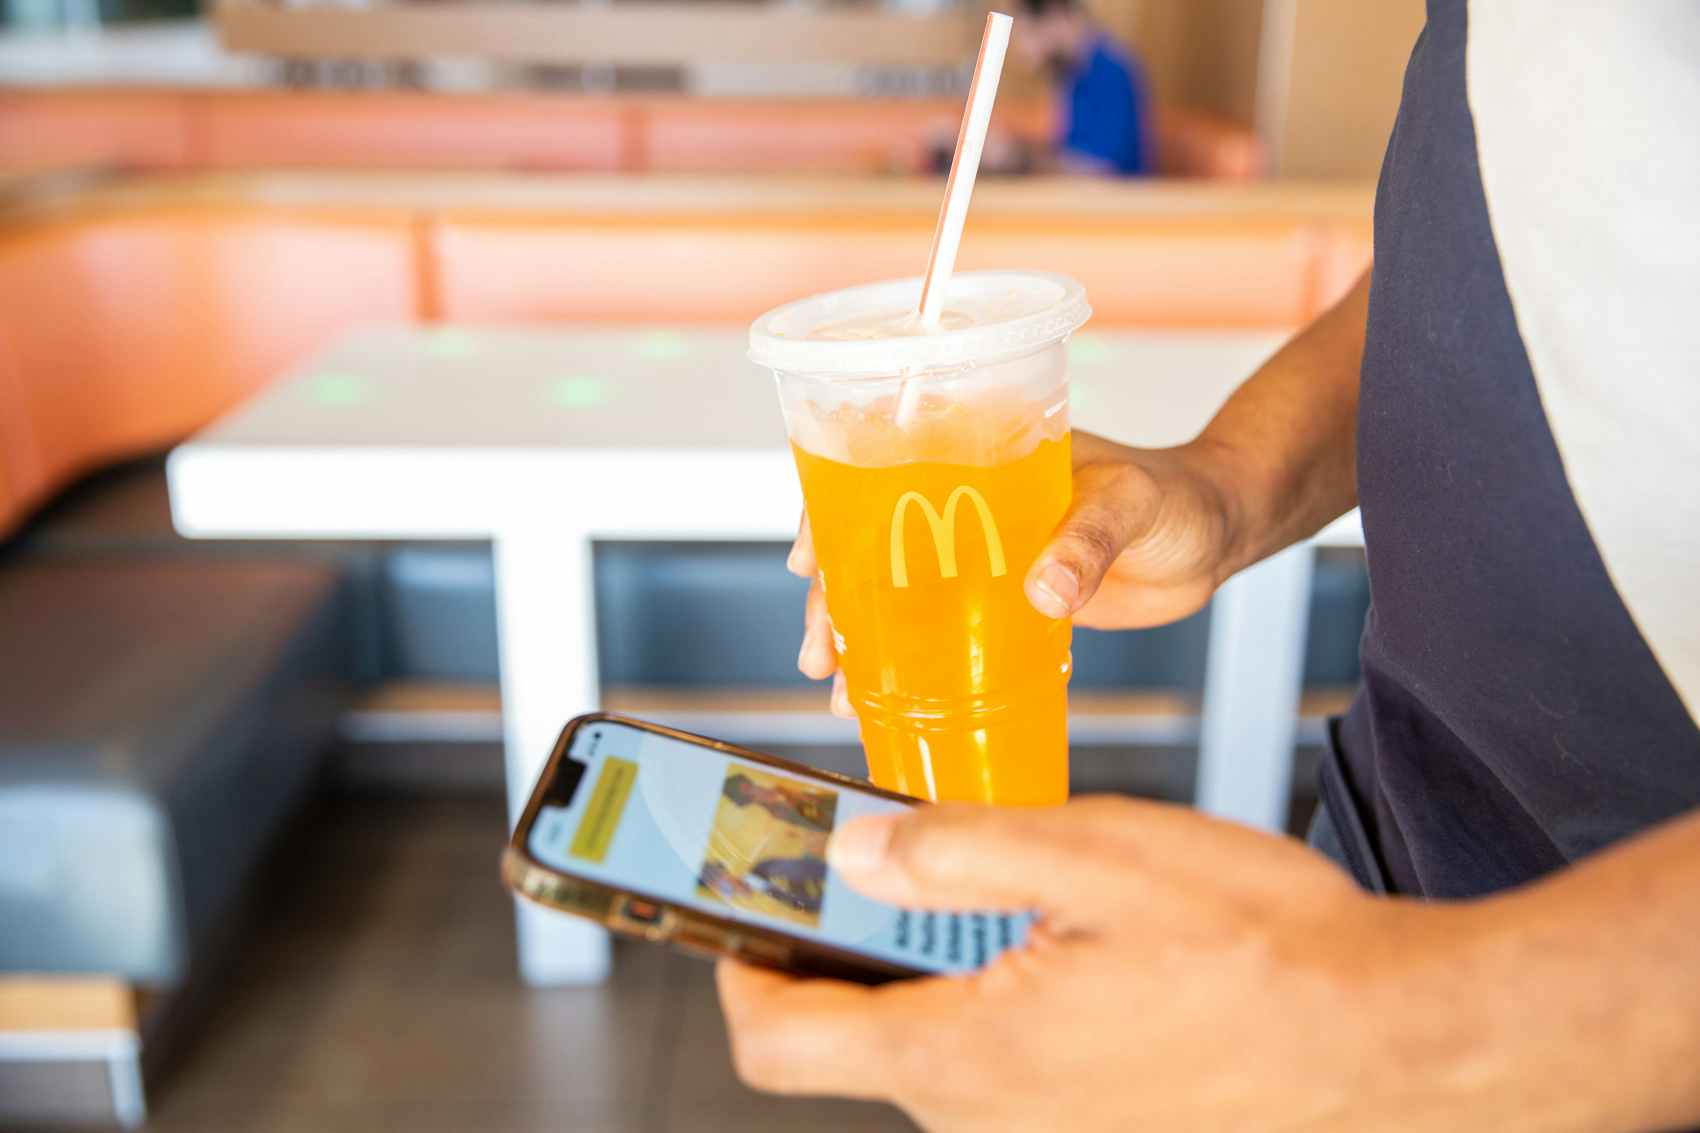 Person on their phone looking at the Mcdonalds app while holding a Soda cup from McDonalds